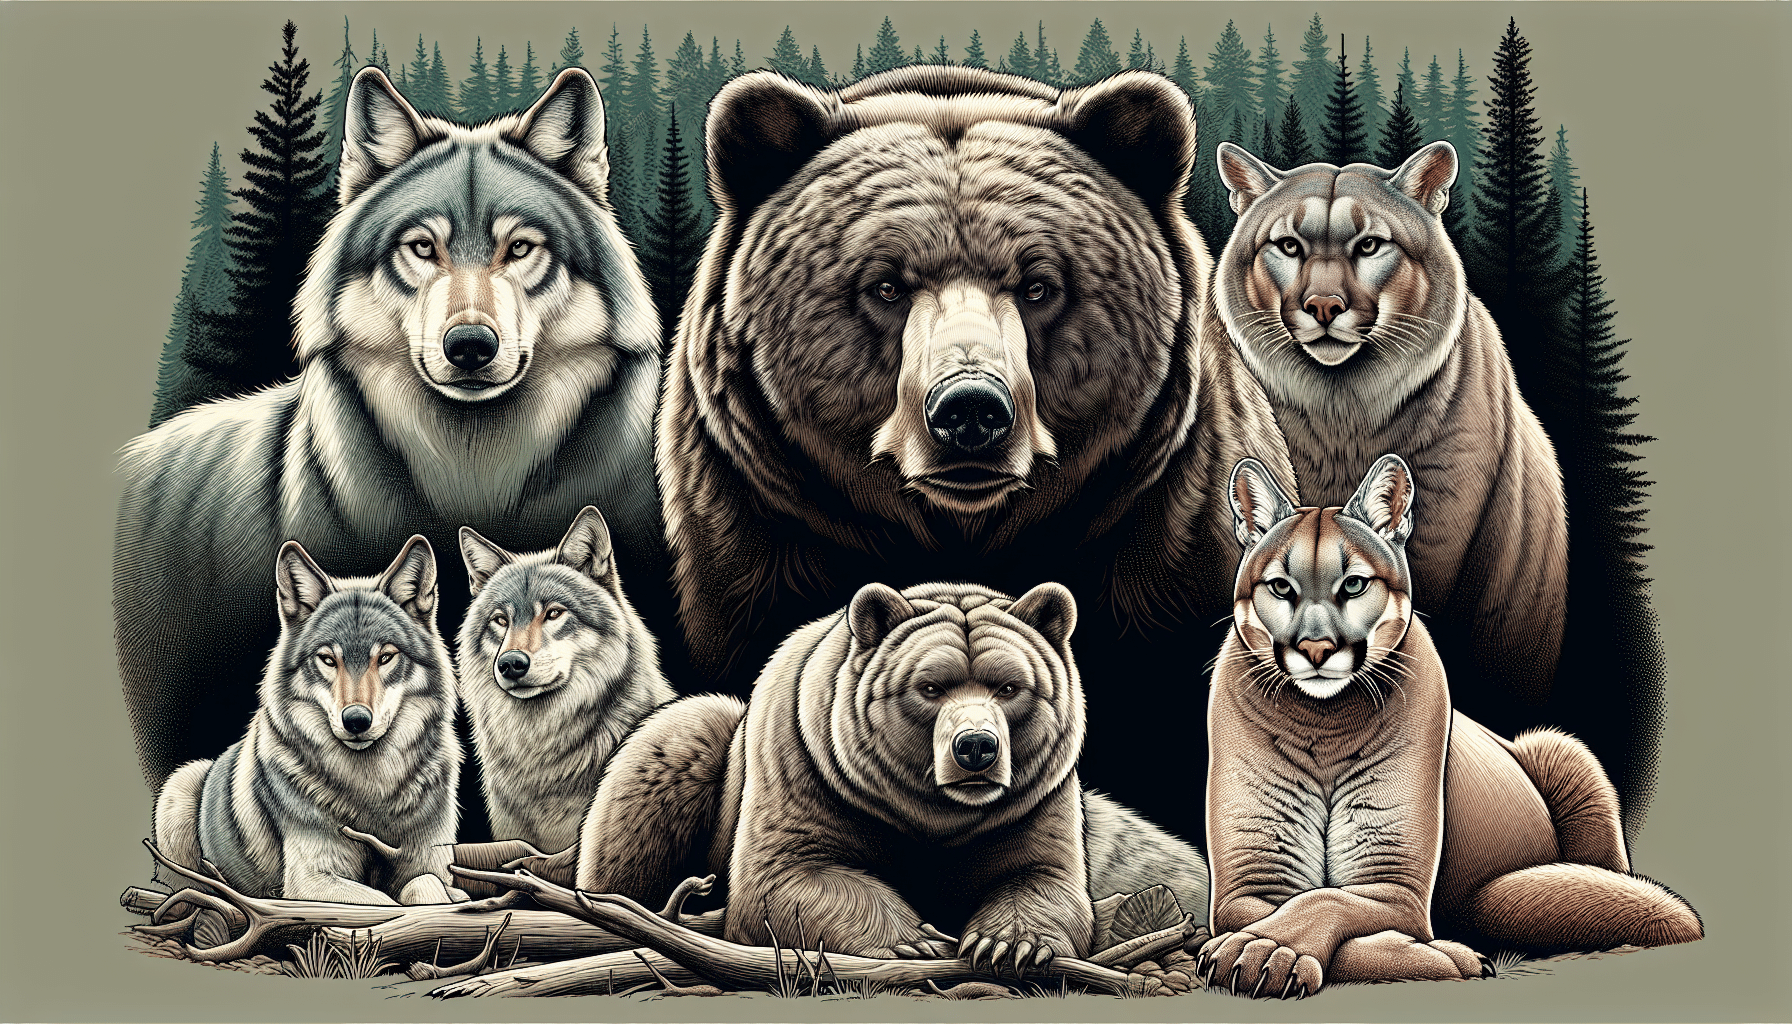 An illustration depicting a grouping of predators known to be potential threats to black bears. To the left, depict a pack of wolves, their fur varying shades of grey, their eyes focused and determined. In the center, display a robust grizzly bear with a powerful build and distinct hump on its back. To the right, show a large and imposing cougar, its tawny fur radiating a subtle menace. Make sure the scene unfolds in a dense forest under daylight, for clarity. Please ensure no text, logos, or brand names appear in the image.